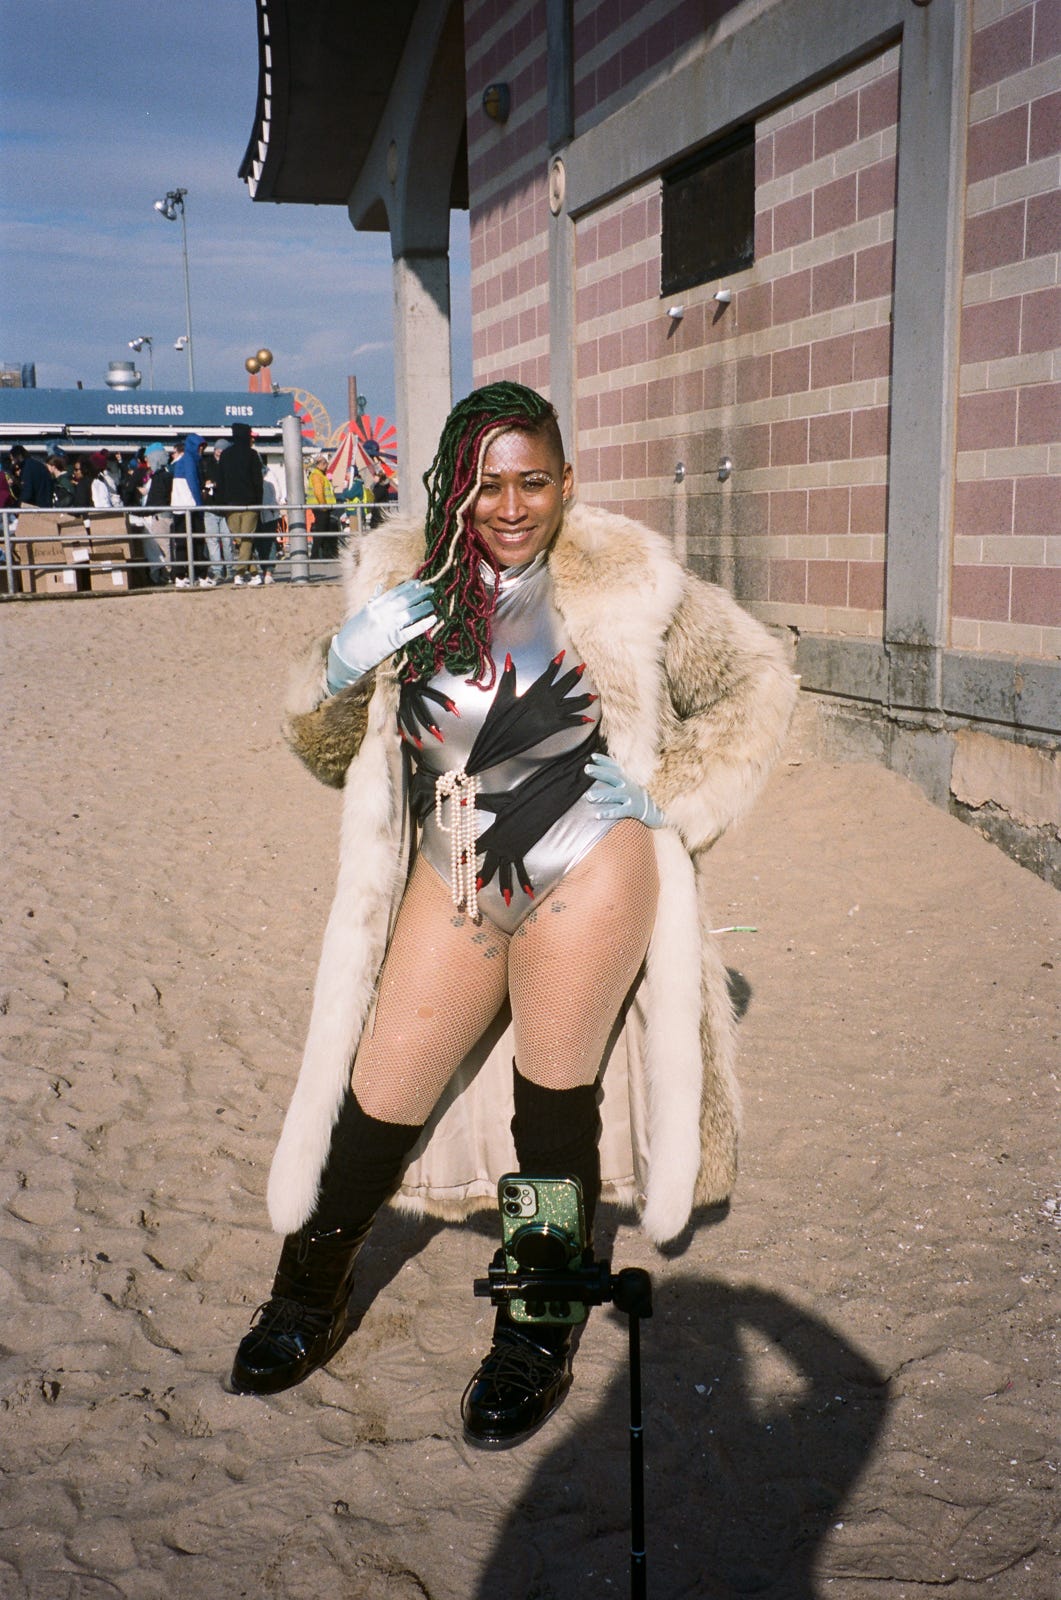 35mm color film photo of woman posing in bathing suit and fur coat